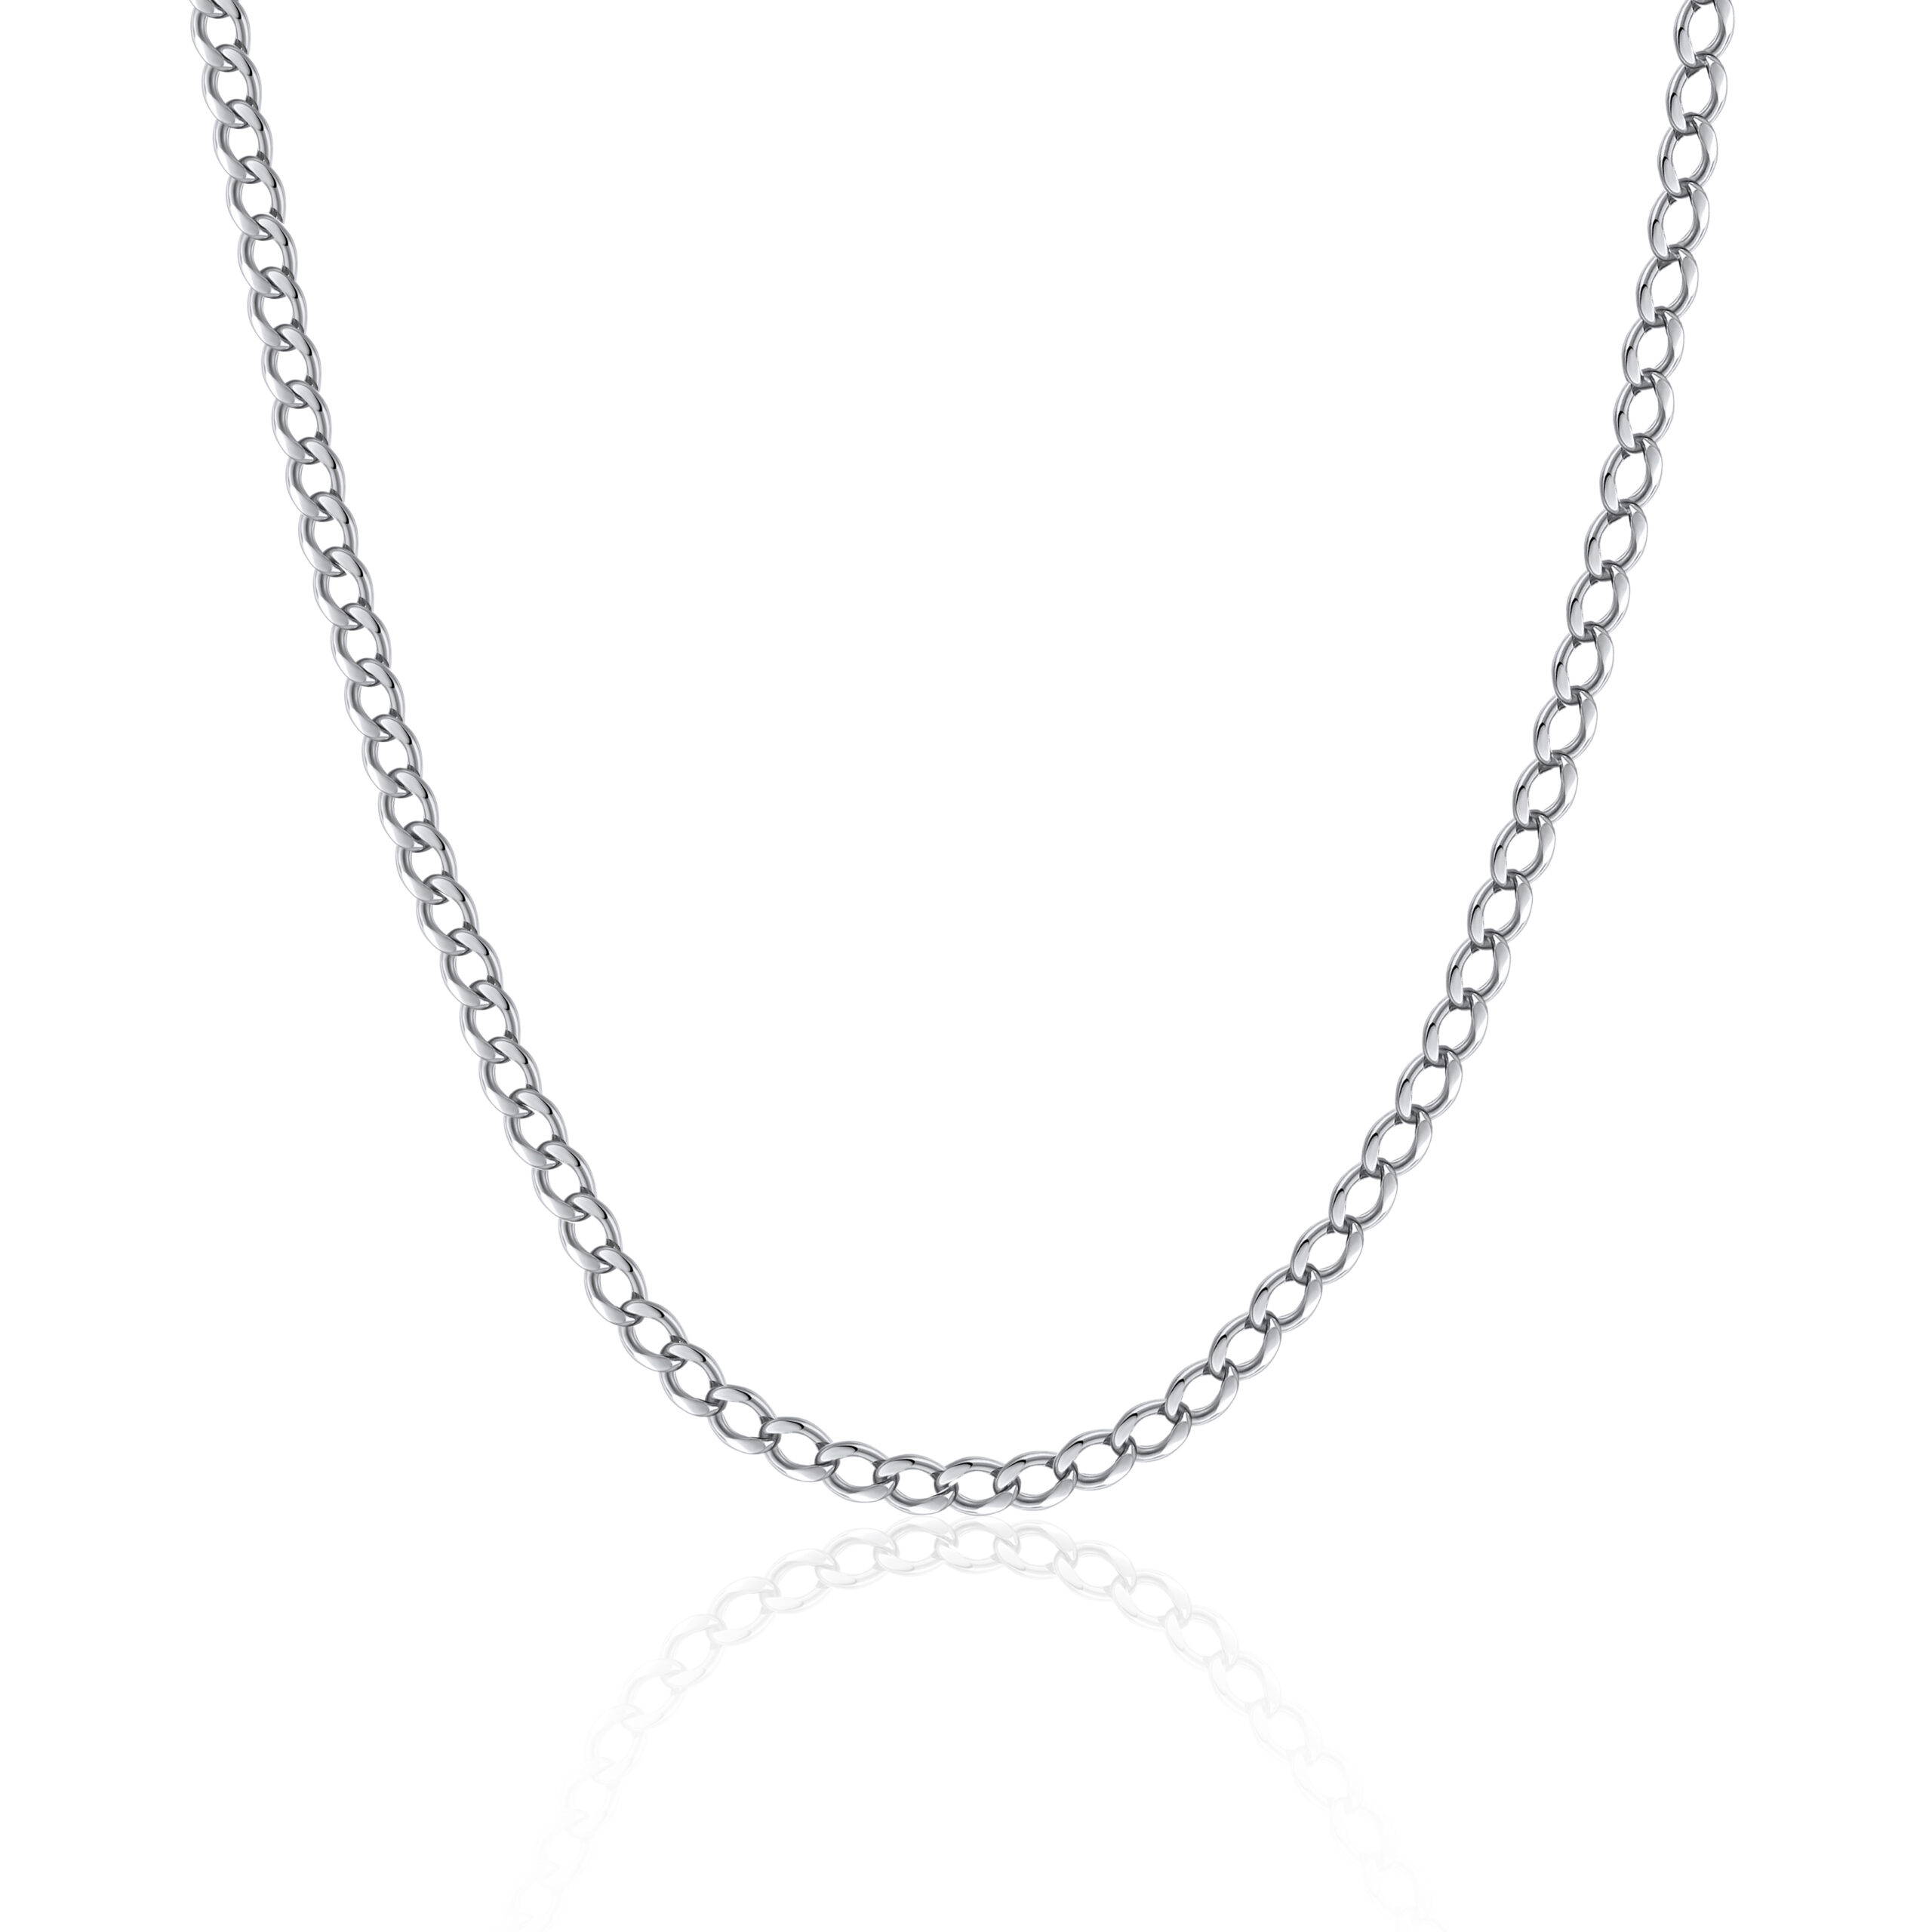 Silver Chain Necklace, Thin Chain Necklace, Stacking Necklace